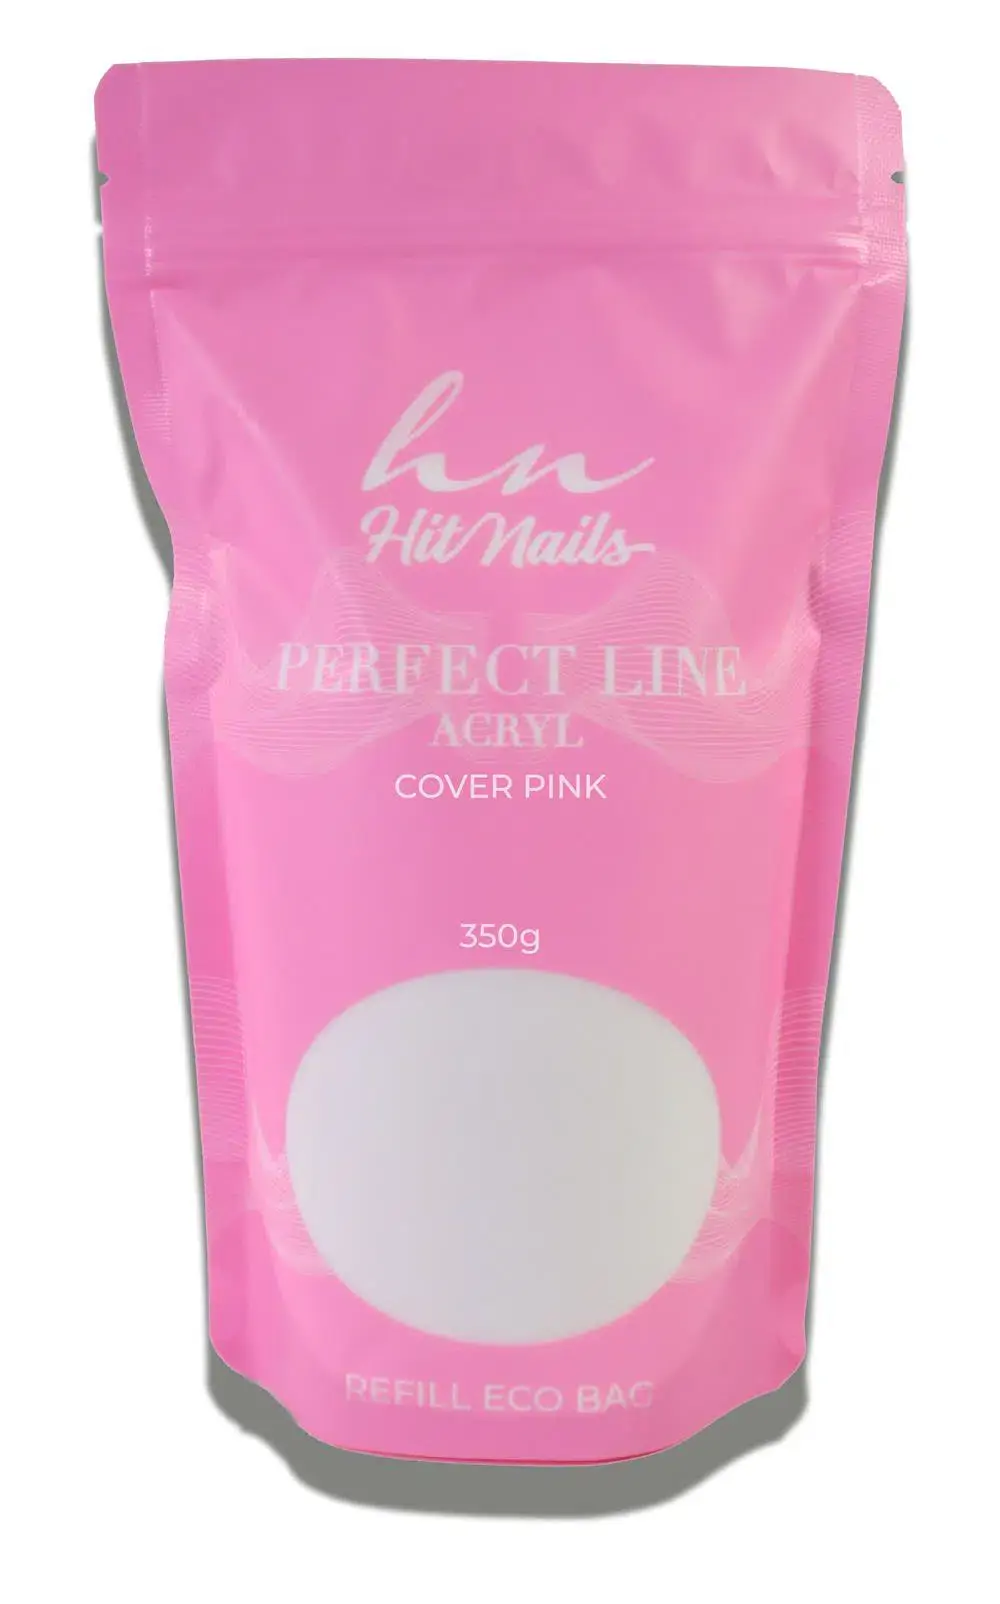 Perfect Line - Acryl - Cover Pink 350g Refill